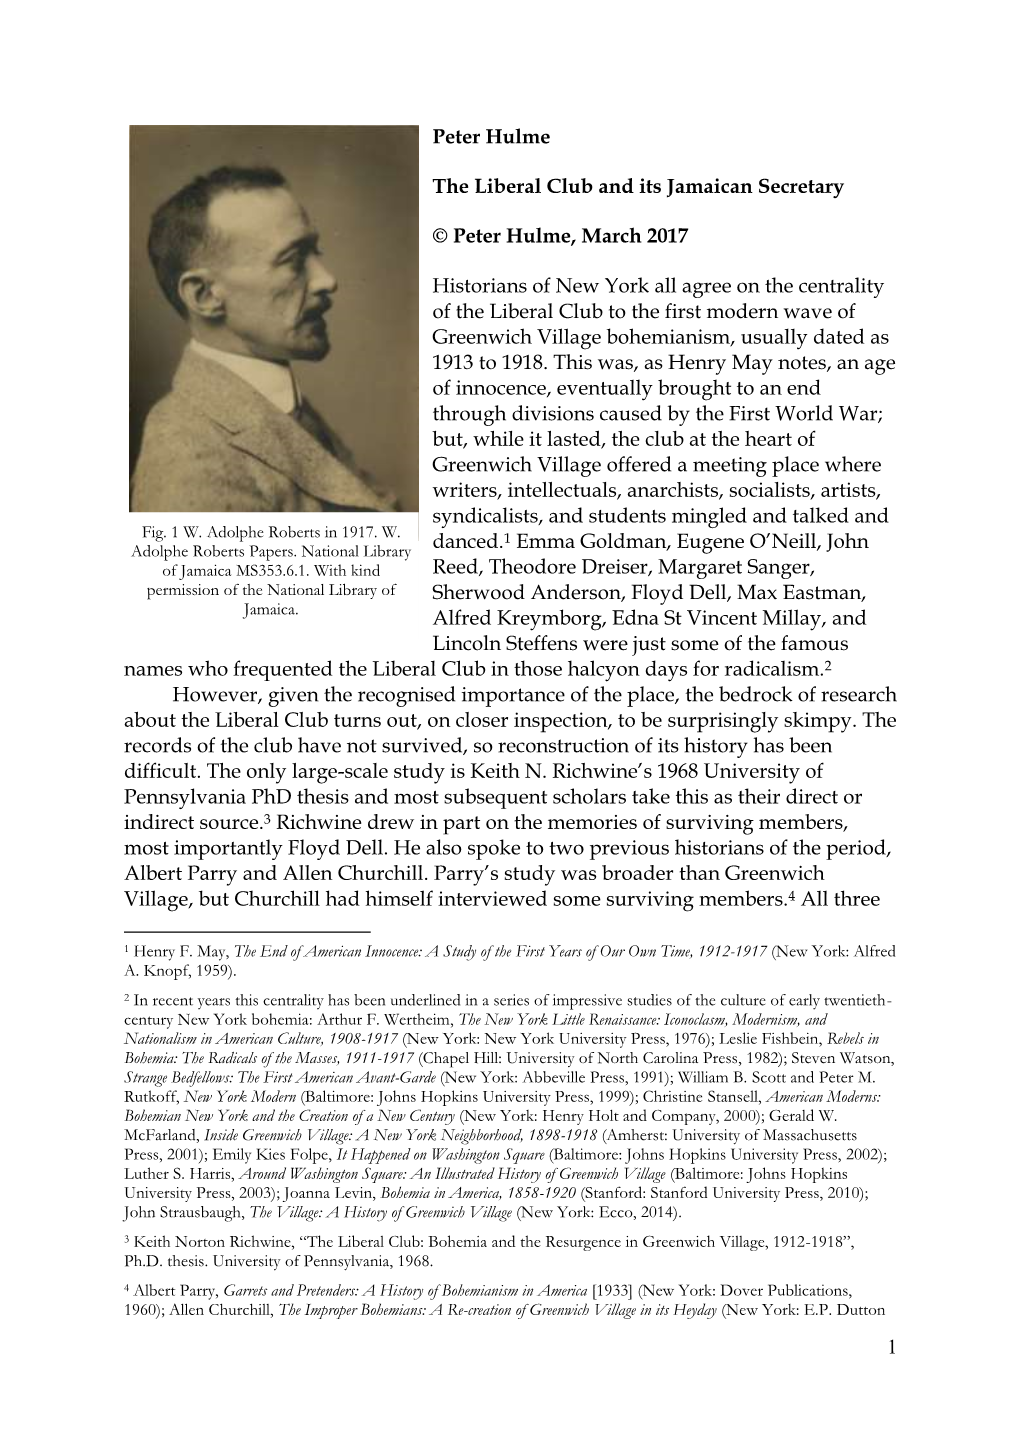 1 Peter Hulme the Liberal Club and Its Jamaican Secretary © Peter Hulme, March 2017 Historians of New York All Agree on The